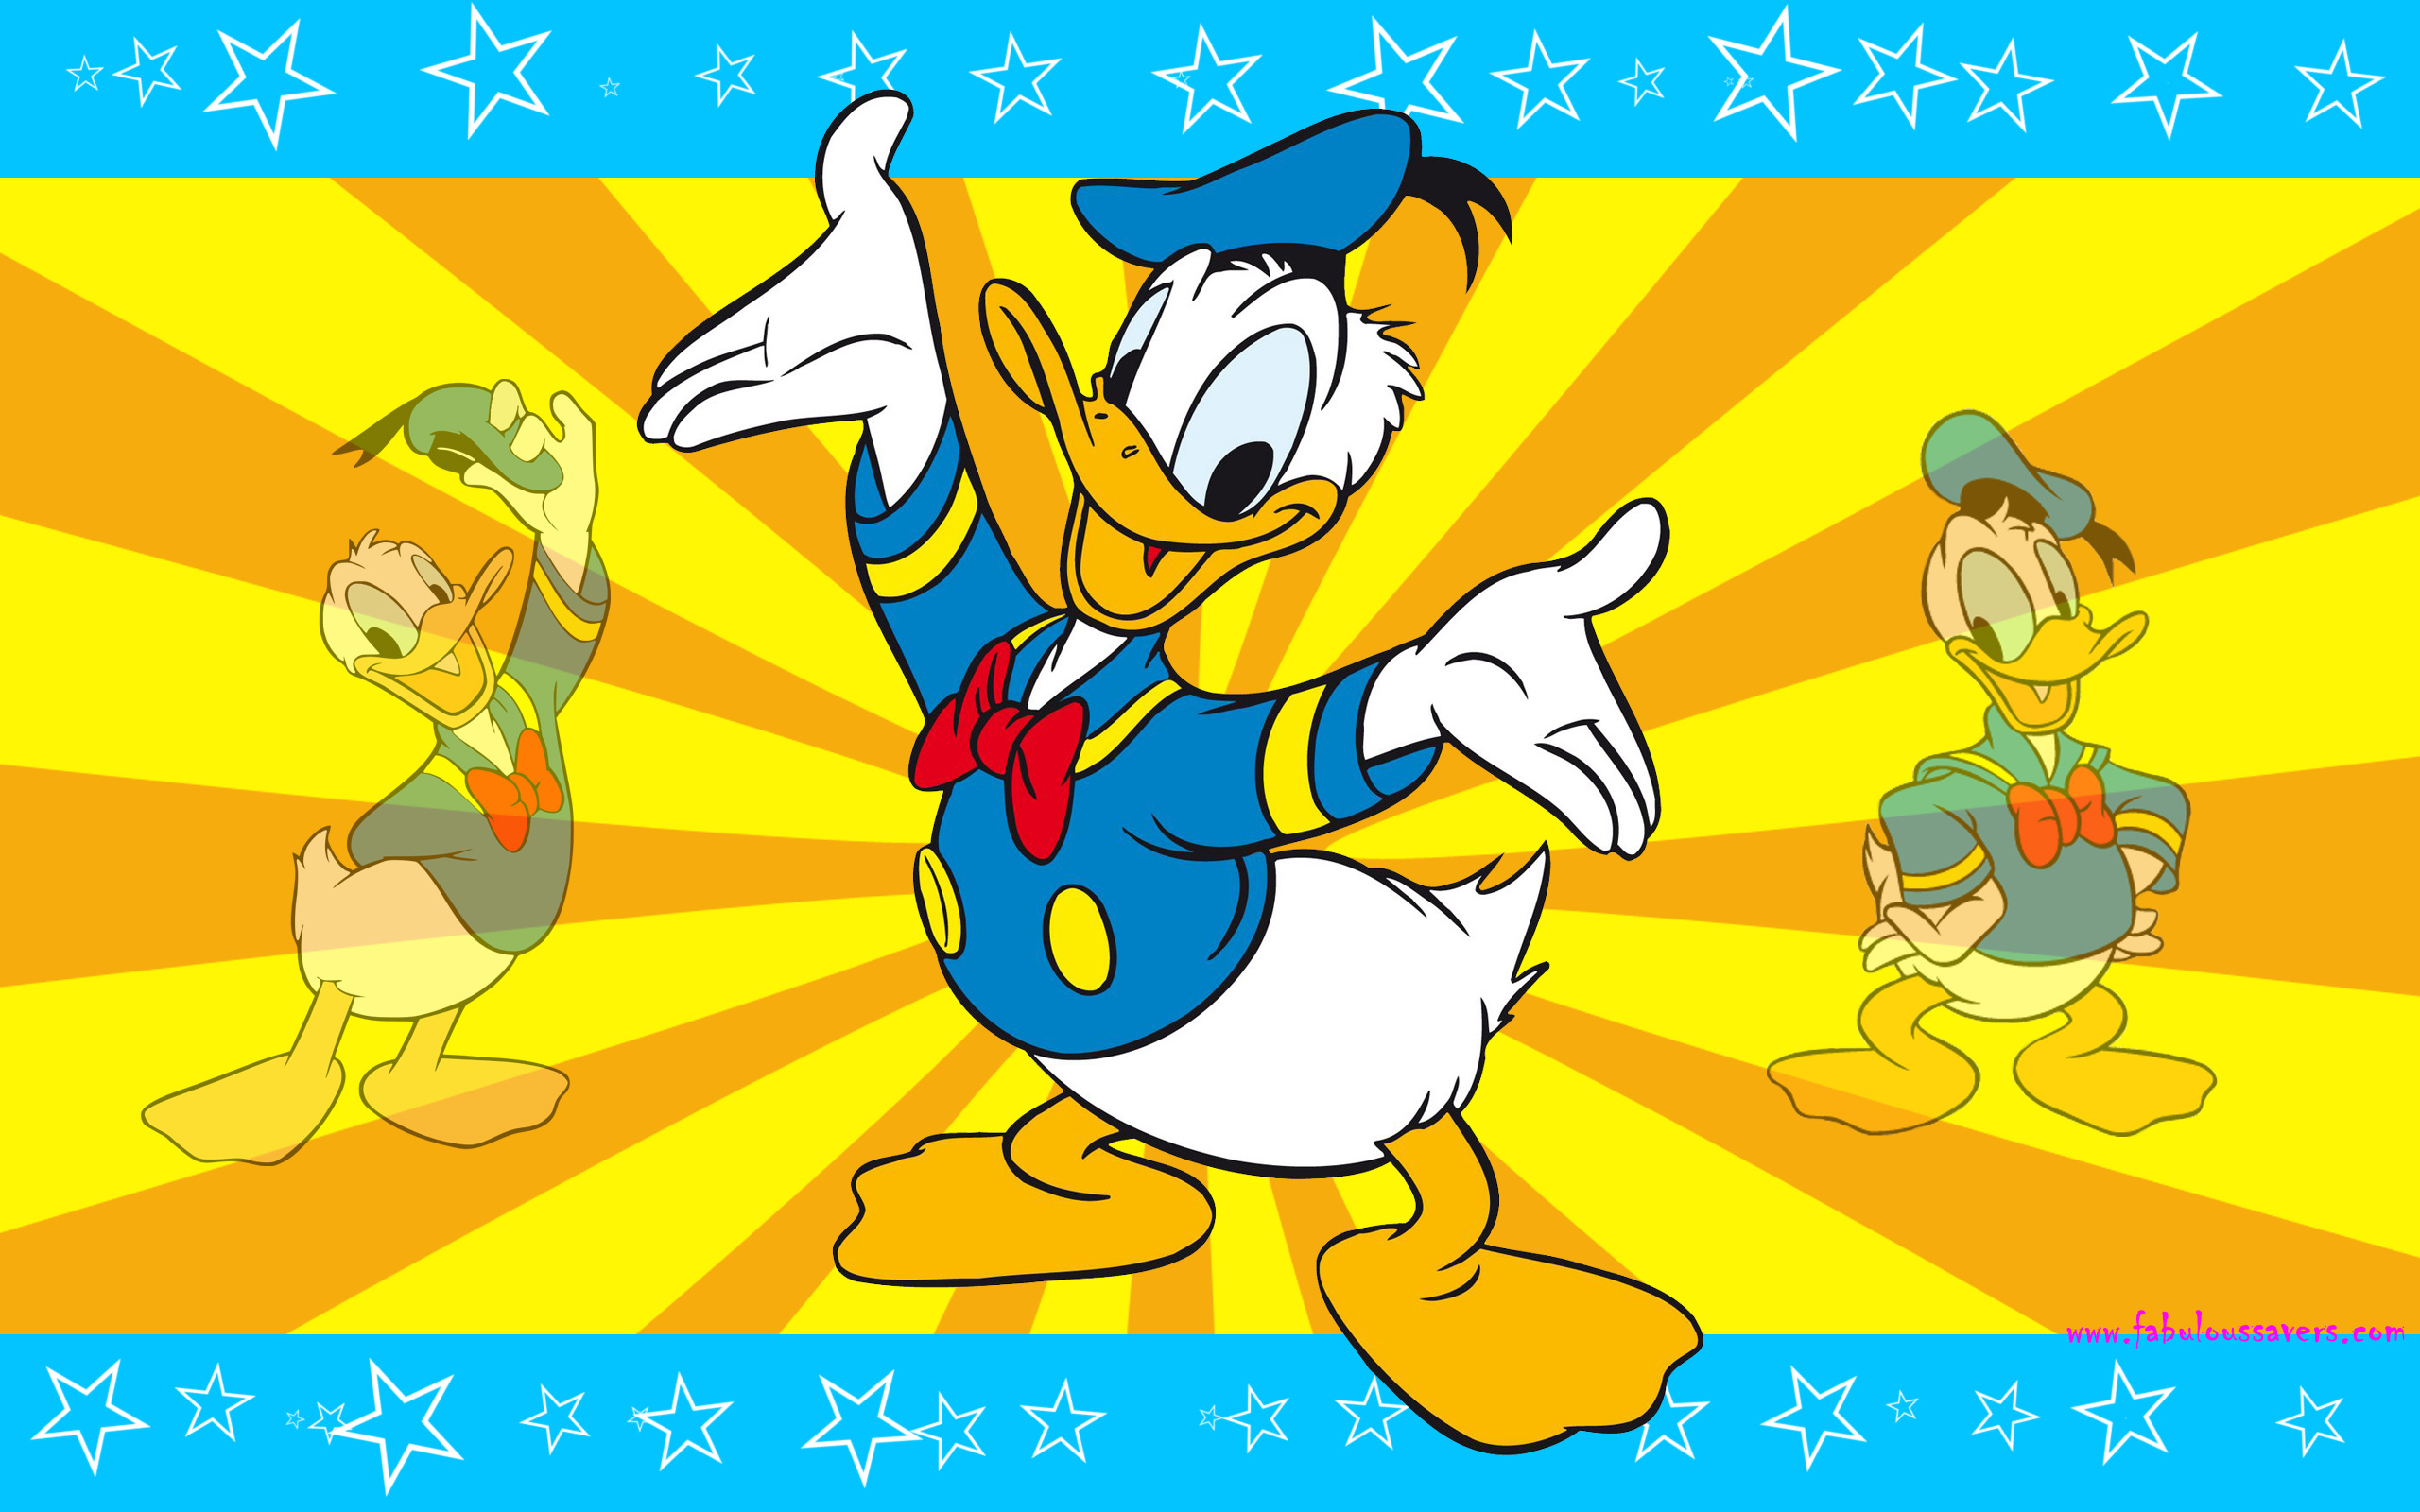 Animated Duck Wallpapers